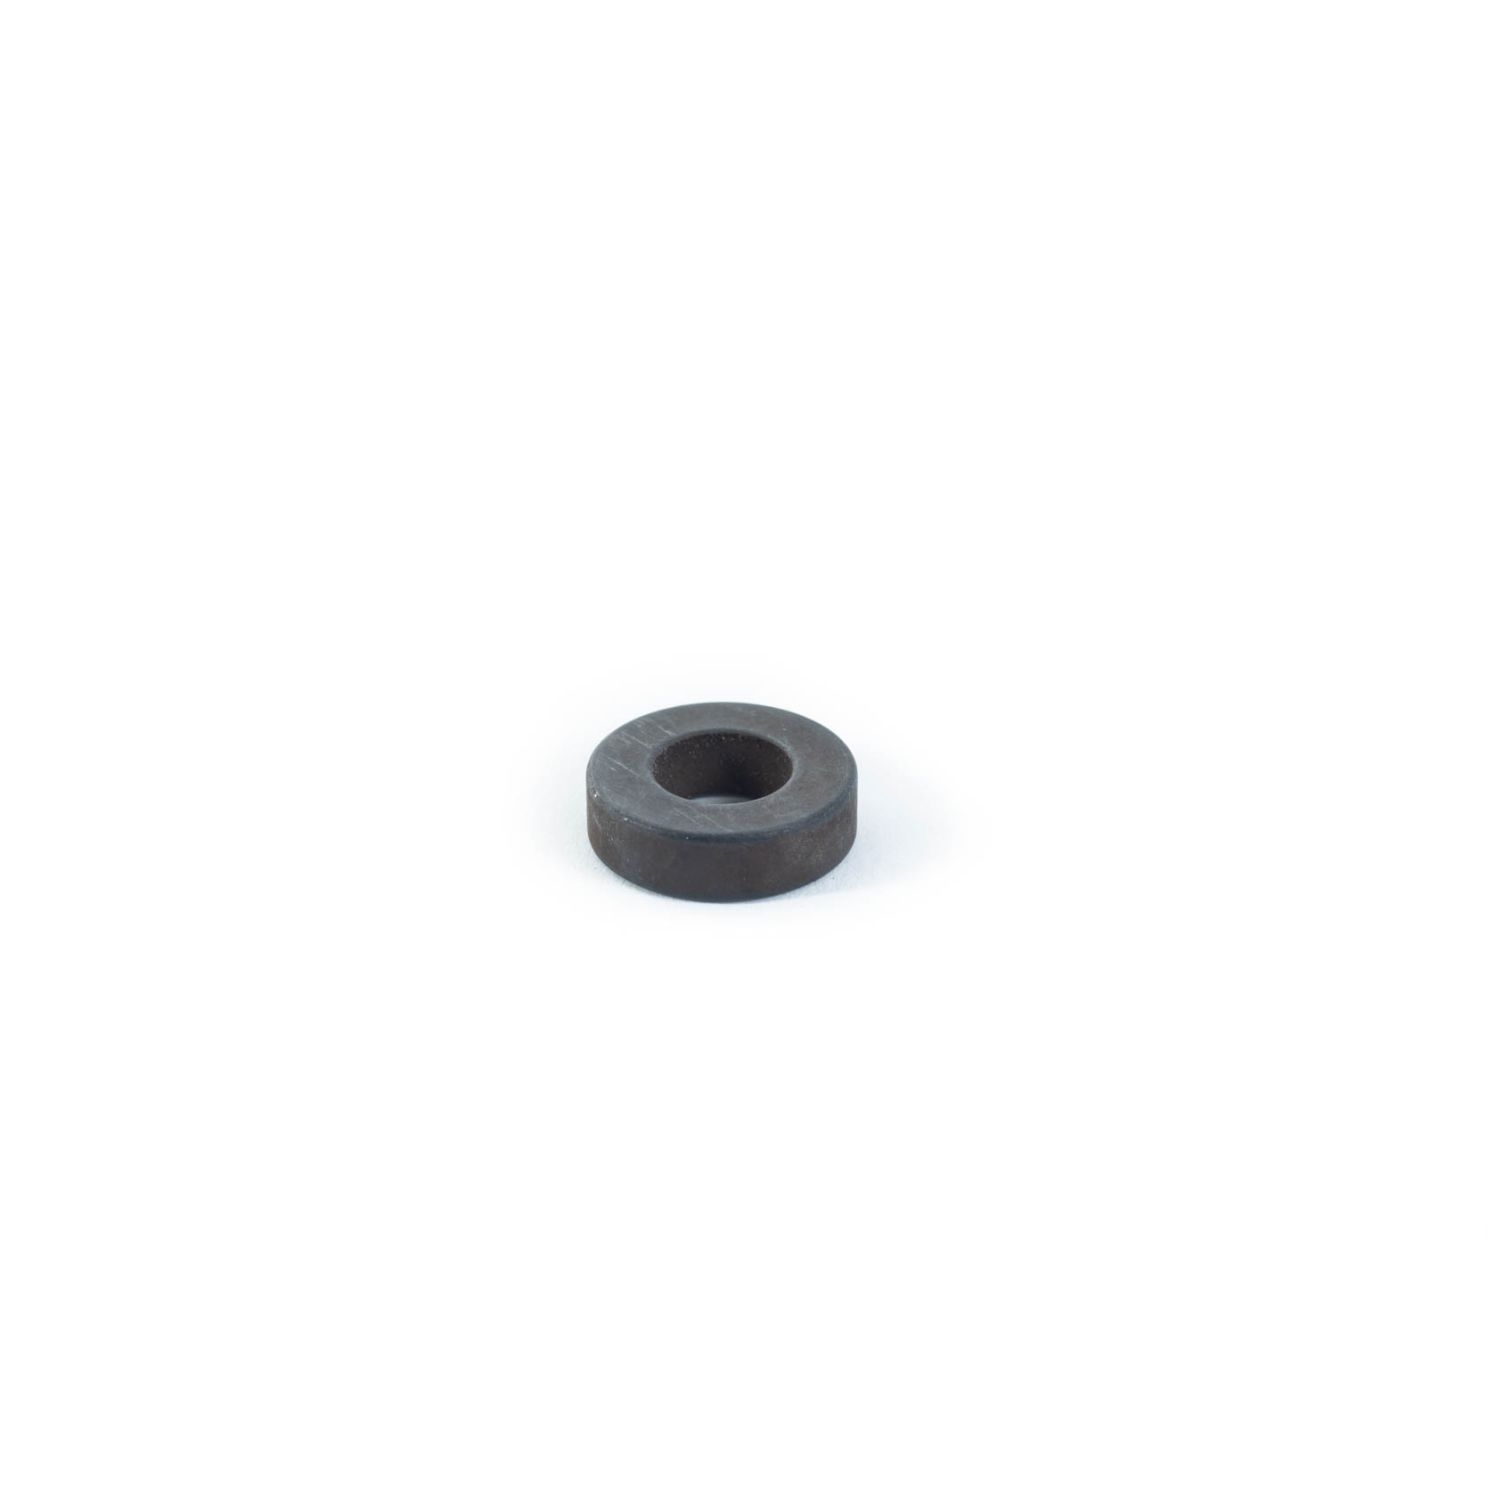 T782 Combine Chopper Trunion Bushing for Paddle Blade fits TSR